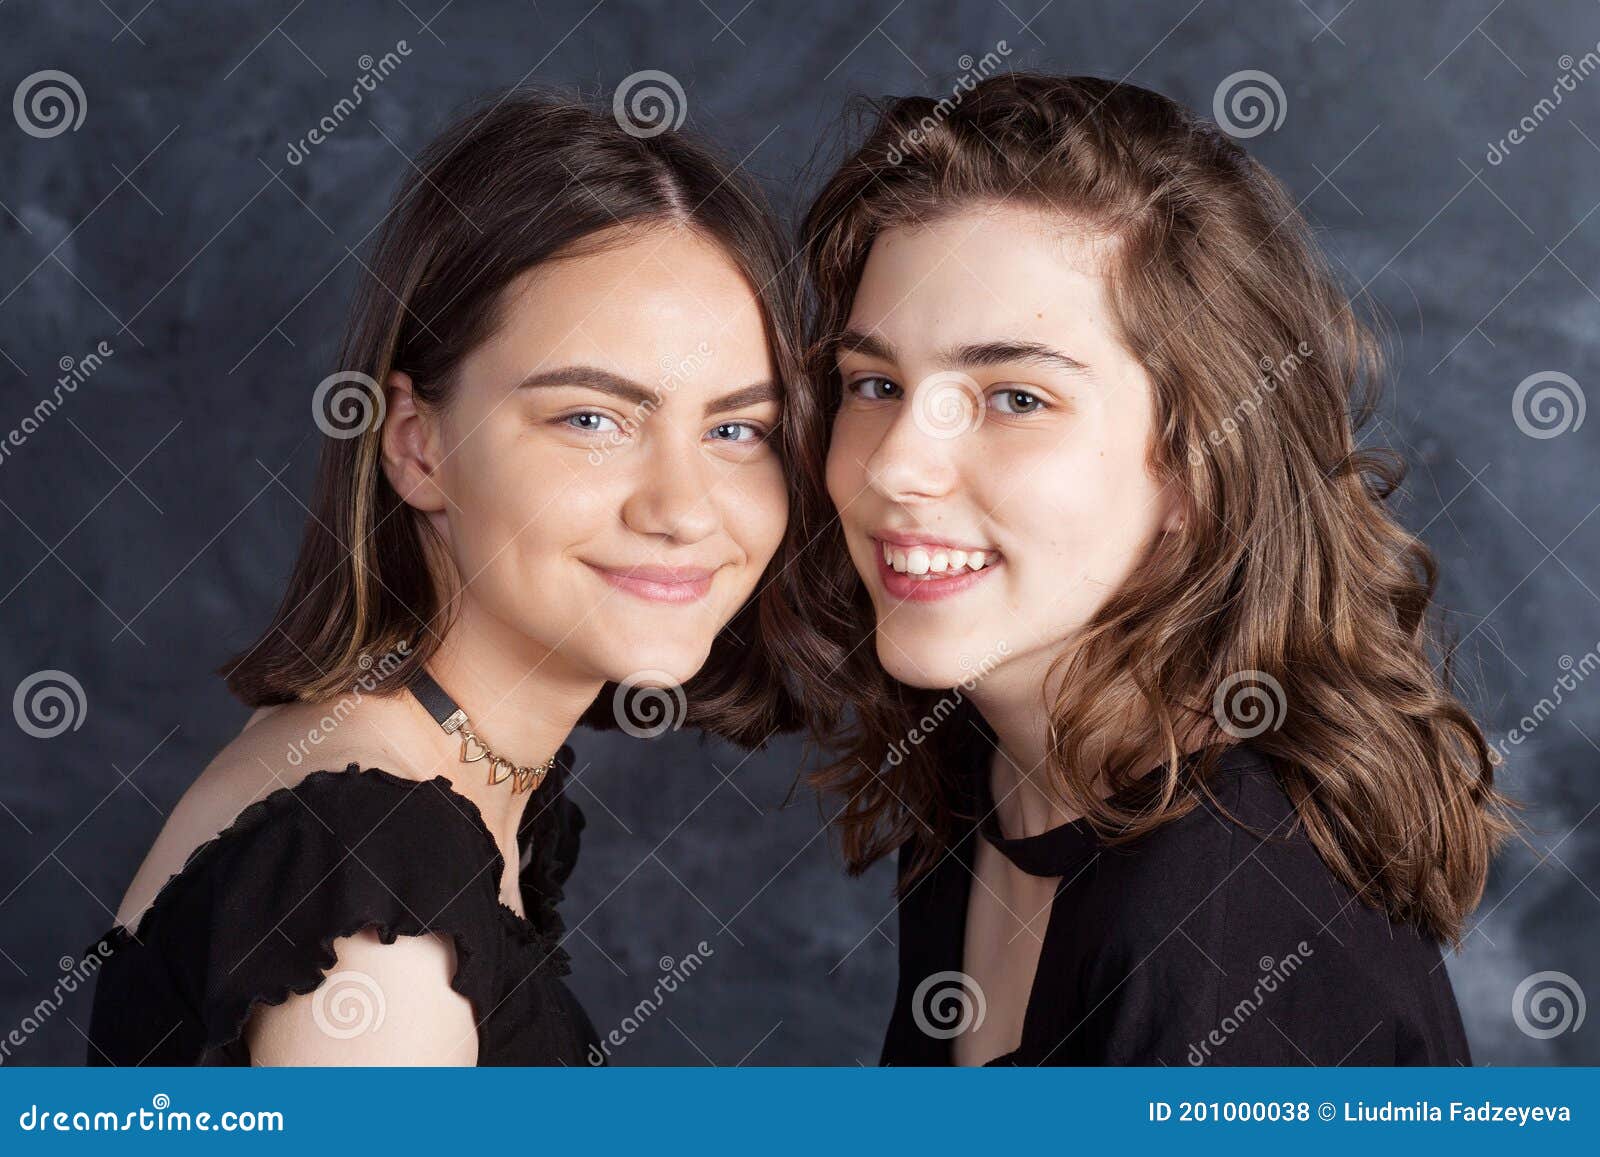 Portrait Of Two Natural Smiling Teenage Girls Close Up Lifestyle